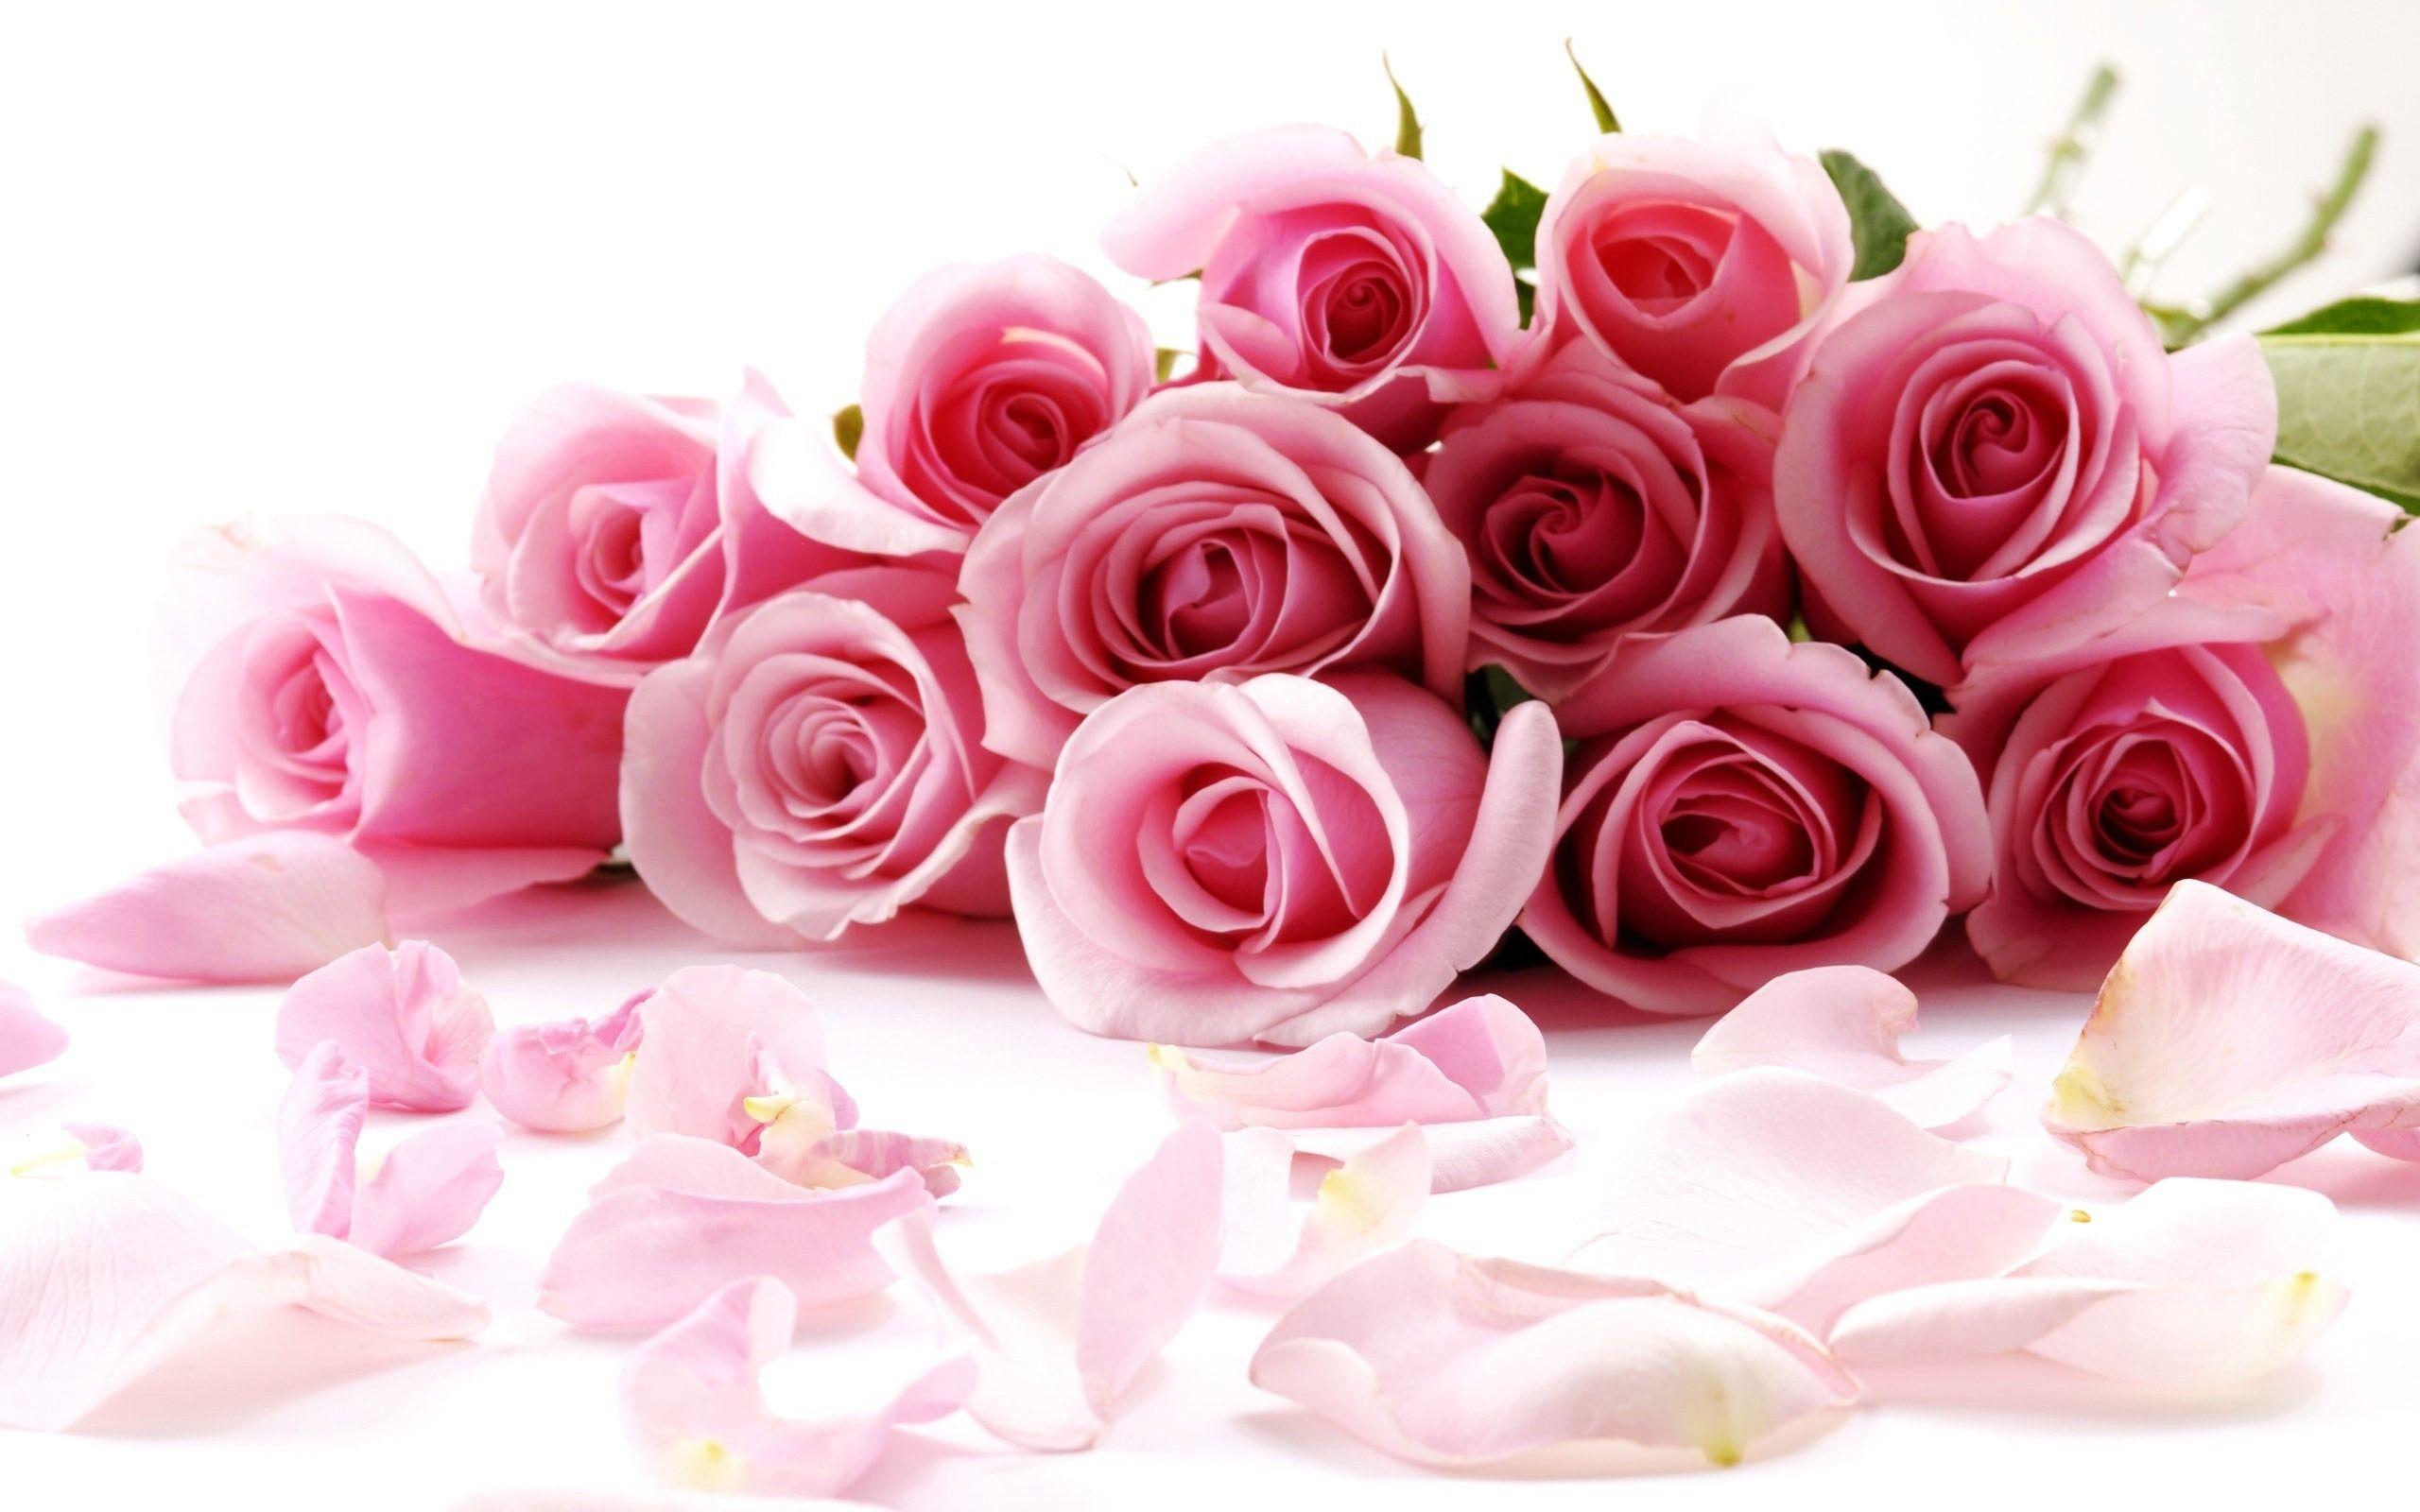 Valentine's Day Roses Wallpaper Free Valentine's Day Roses